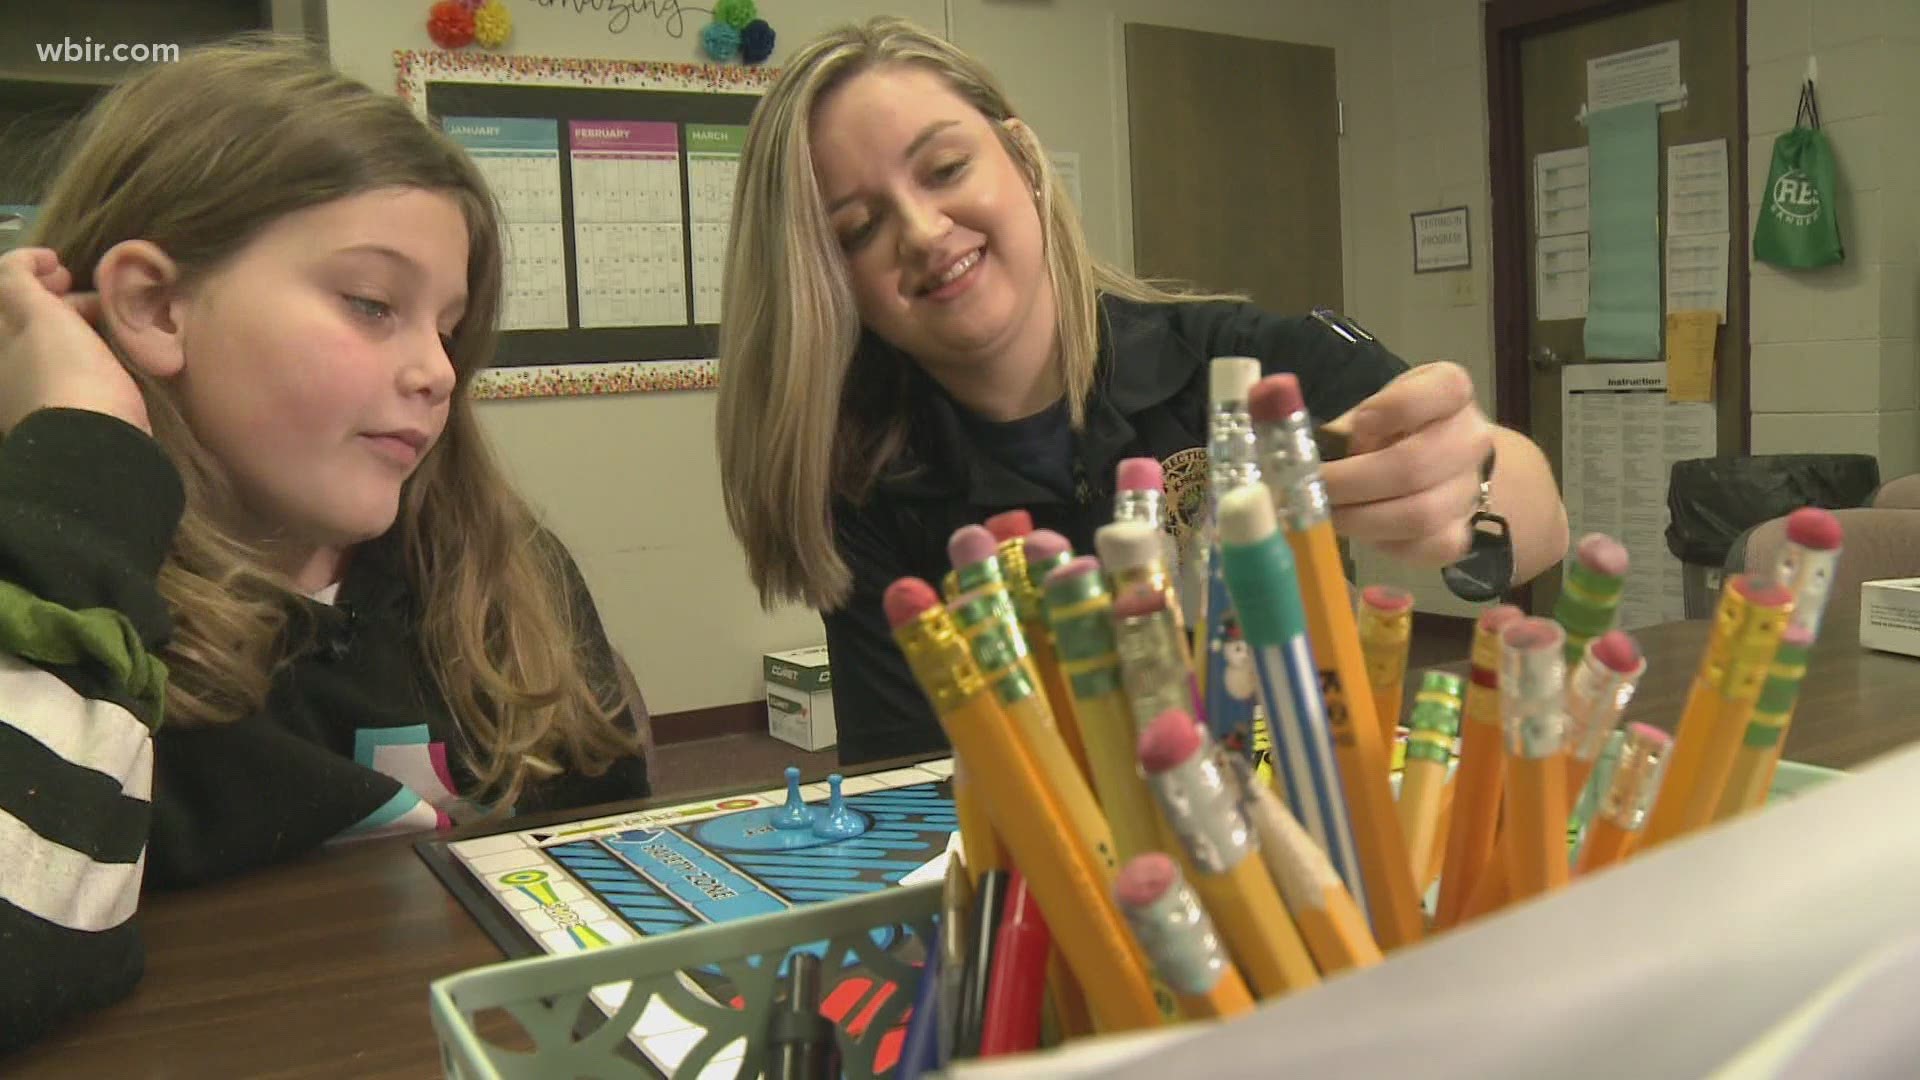 Cpl. Parton and the 9-year-old were matched last year through Big Brothers Big Sisters of East Tennessee as part of Ritta Elementary School's 'Big in Blue' program.